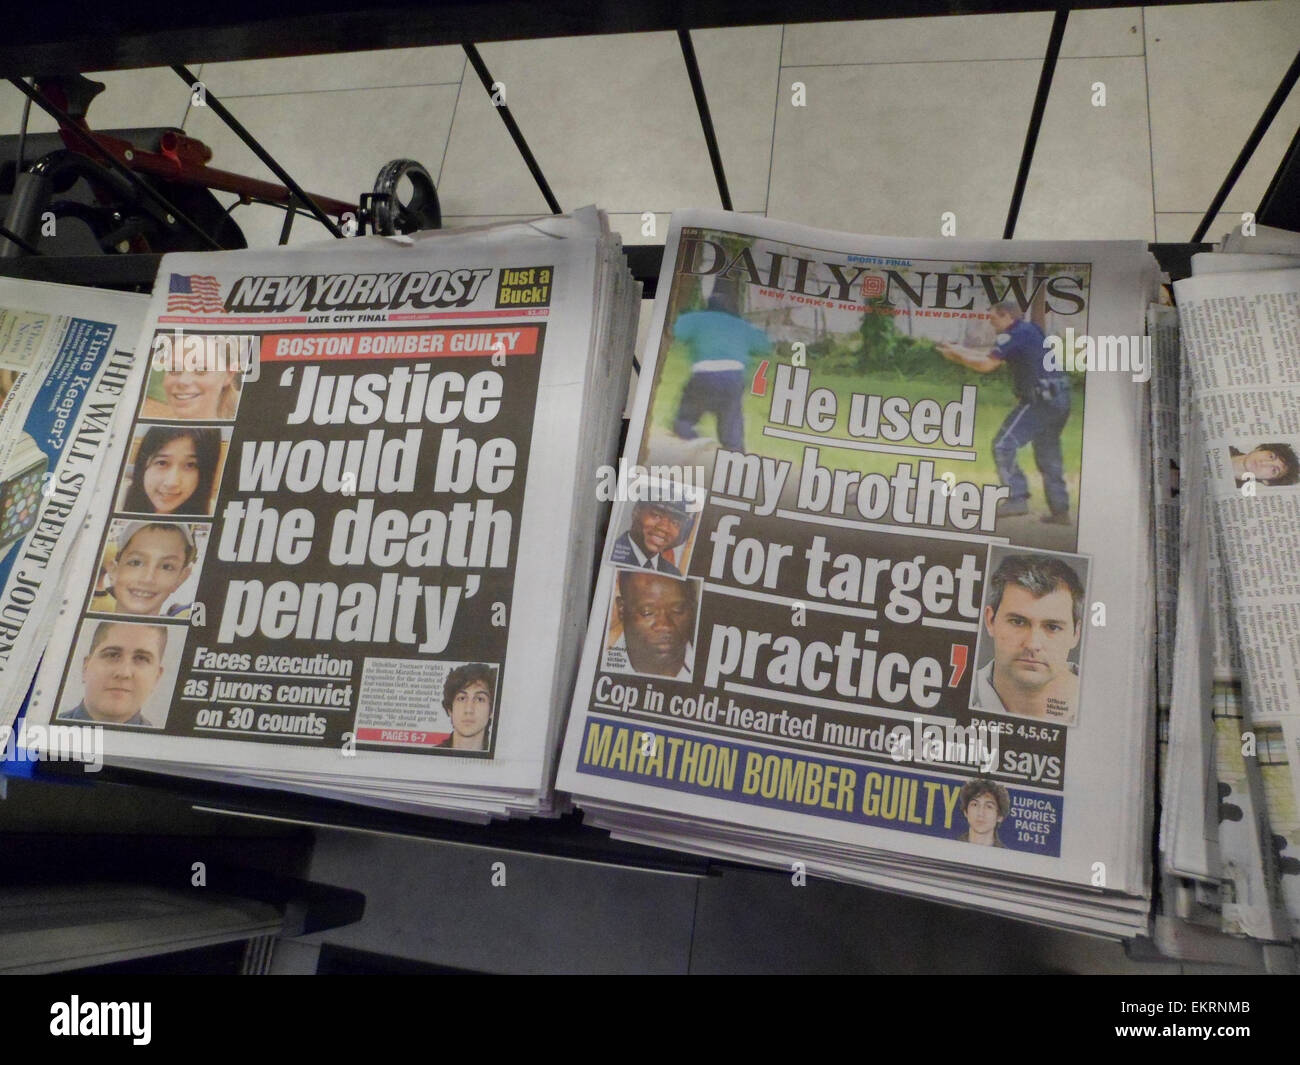 The competing tabloids, the New York Daily News and the New York Post use different news items for their front pages on Thursday, April 9, 2015. While the NYDN uses the police shooting in South Carolina, the NYP uses the conviction of Dzhokhar Tsarnaev in Boston. (© Richard B. Levine) Stock Photo